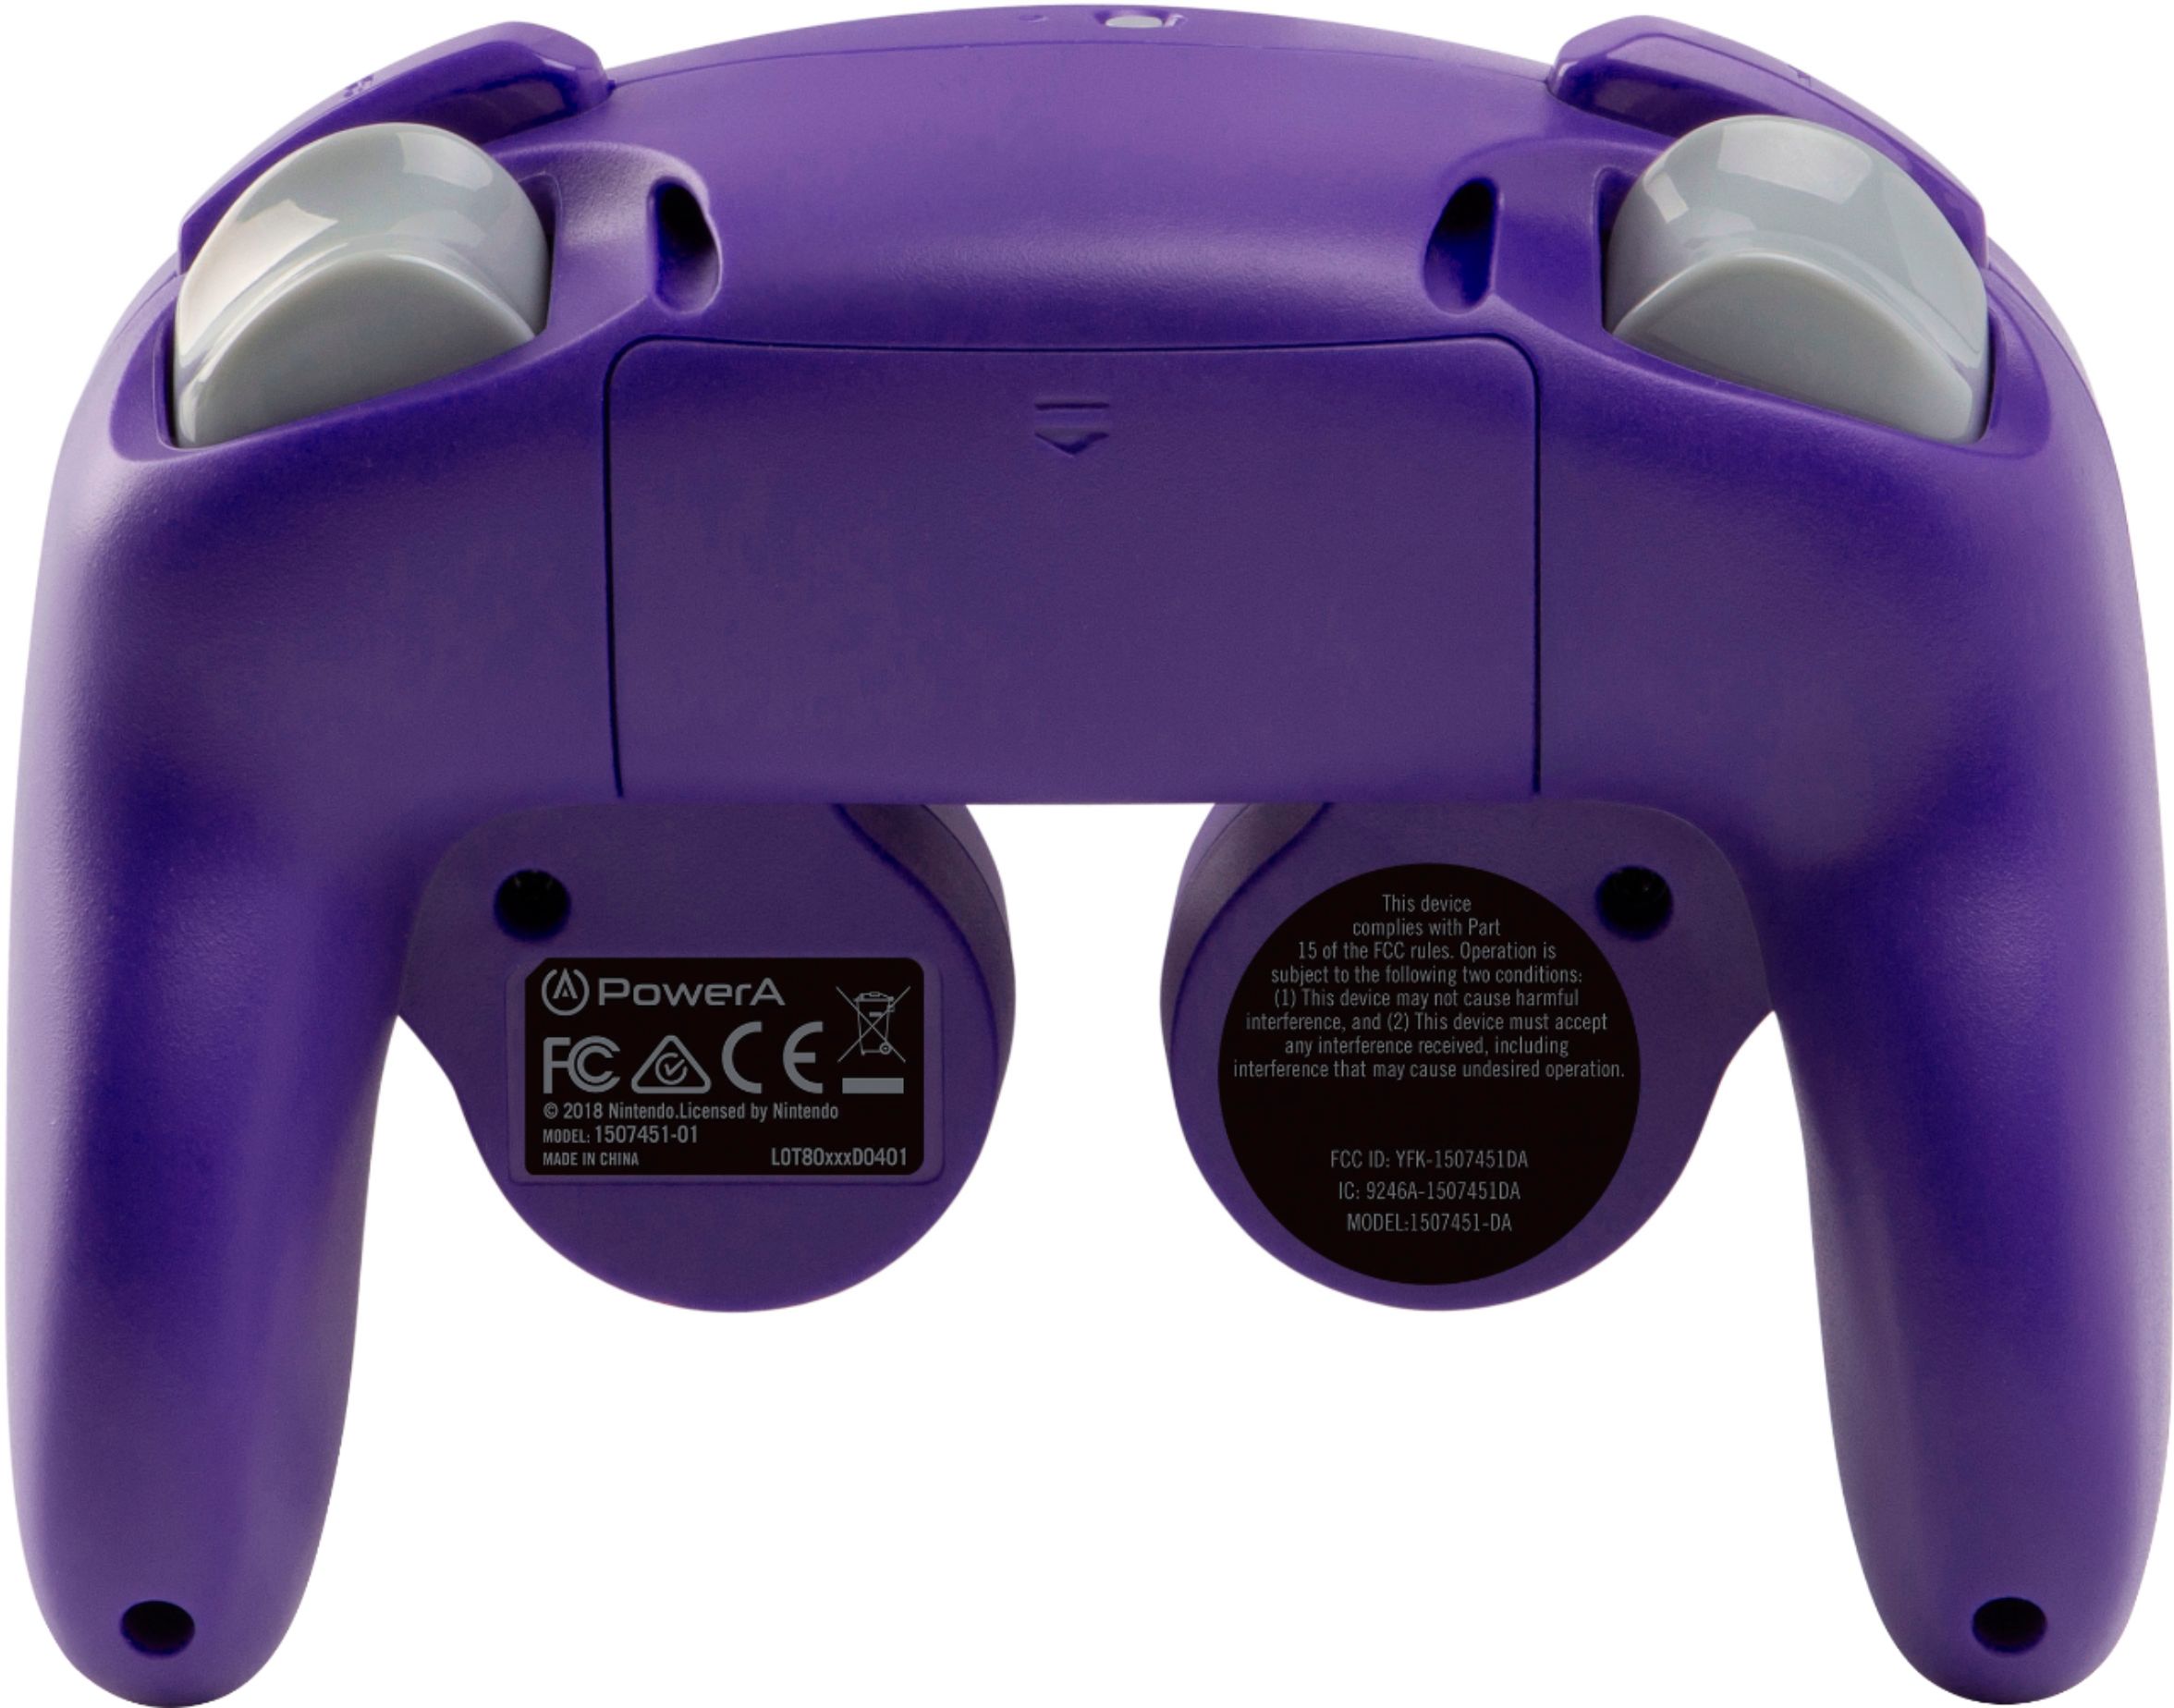 best gamecube controller for switch